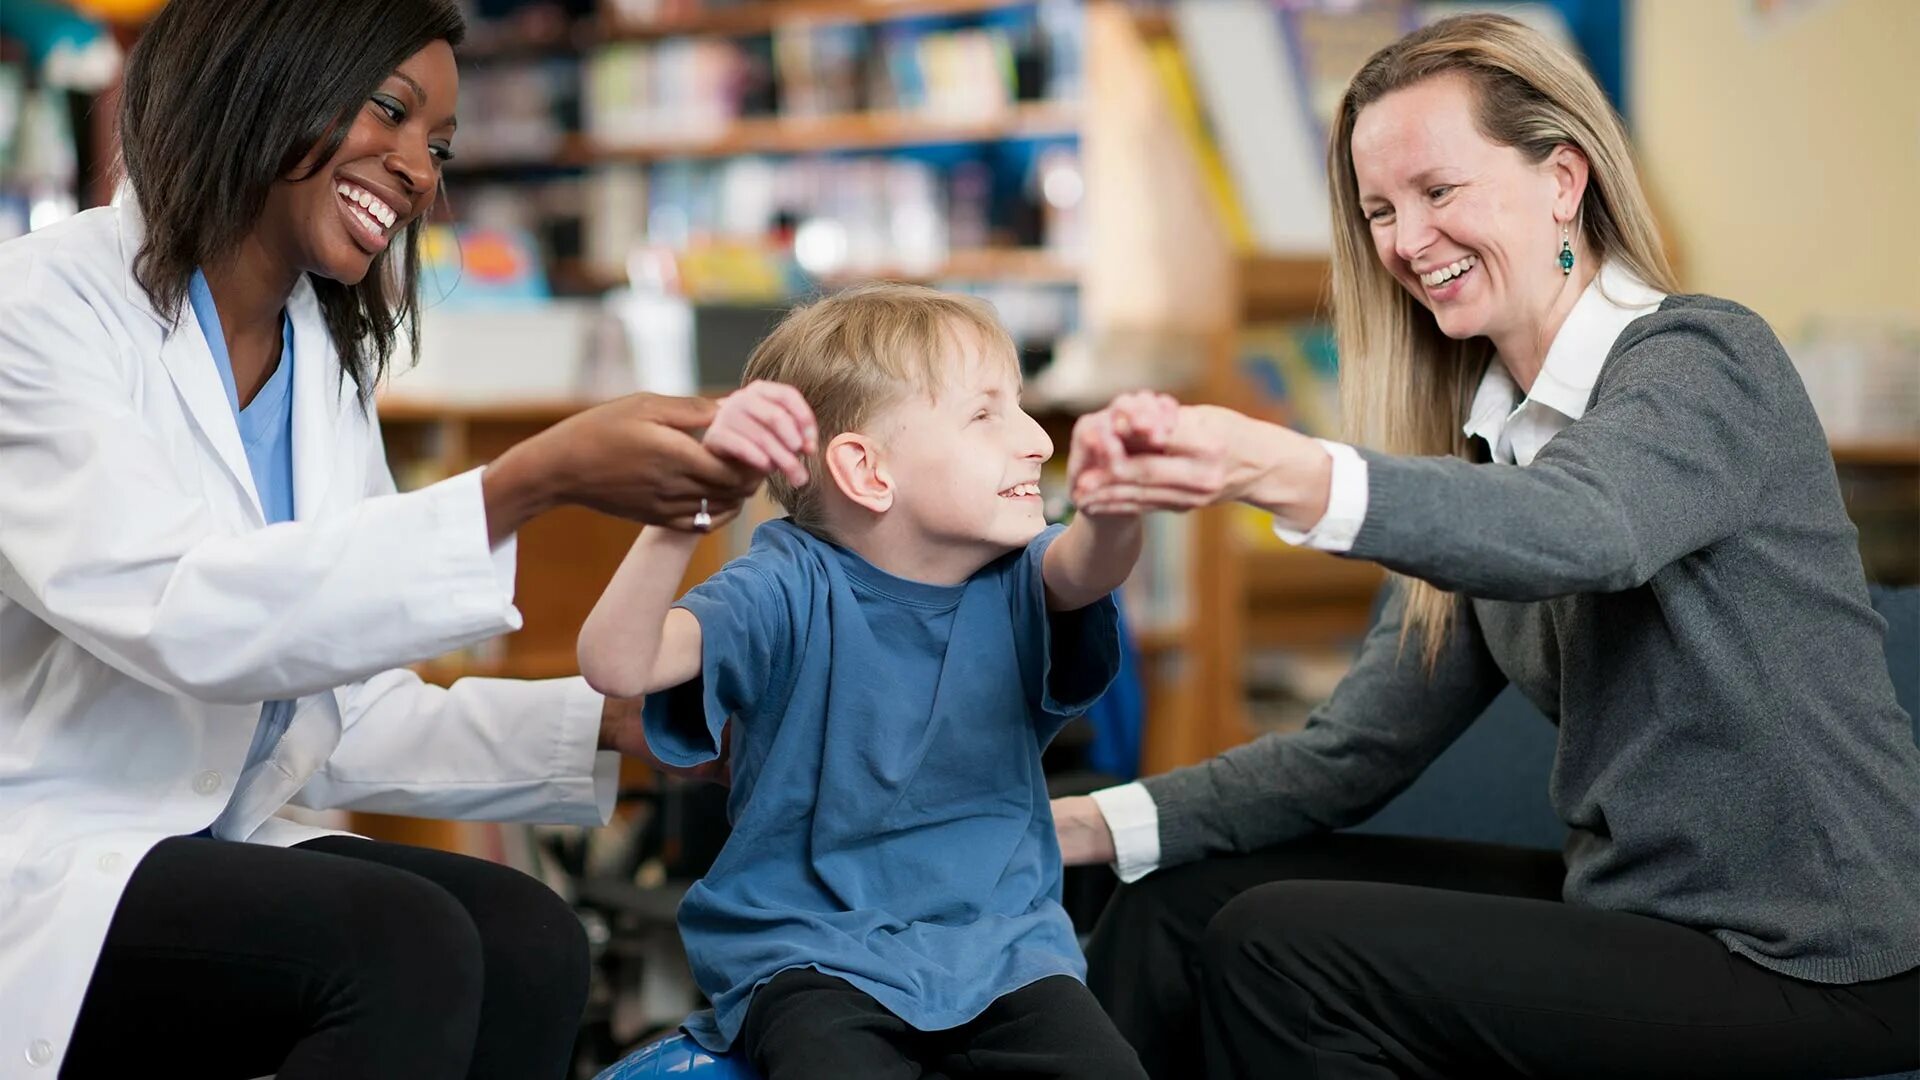 Child service. Children with Disabilities. Education with physical Education of children with Special needs. Occupational Therapy Education. Occupational Therapy Education needed.